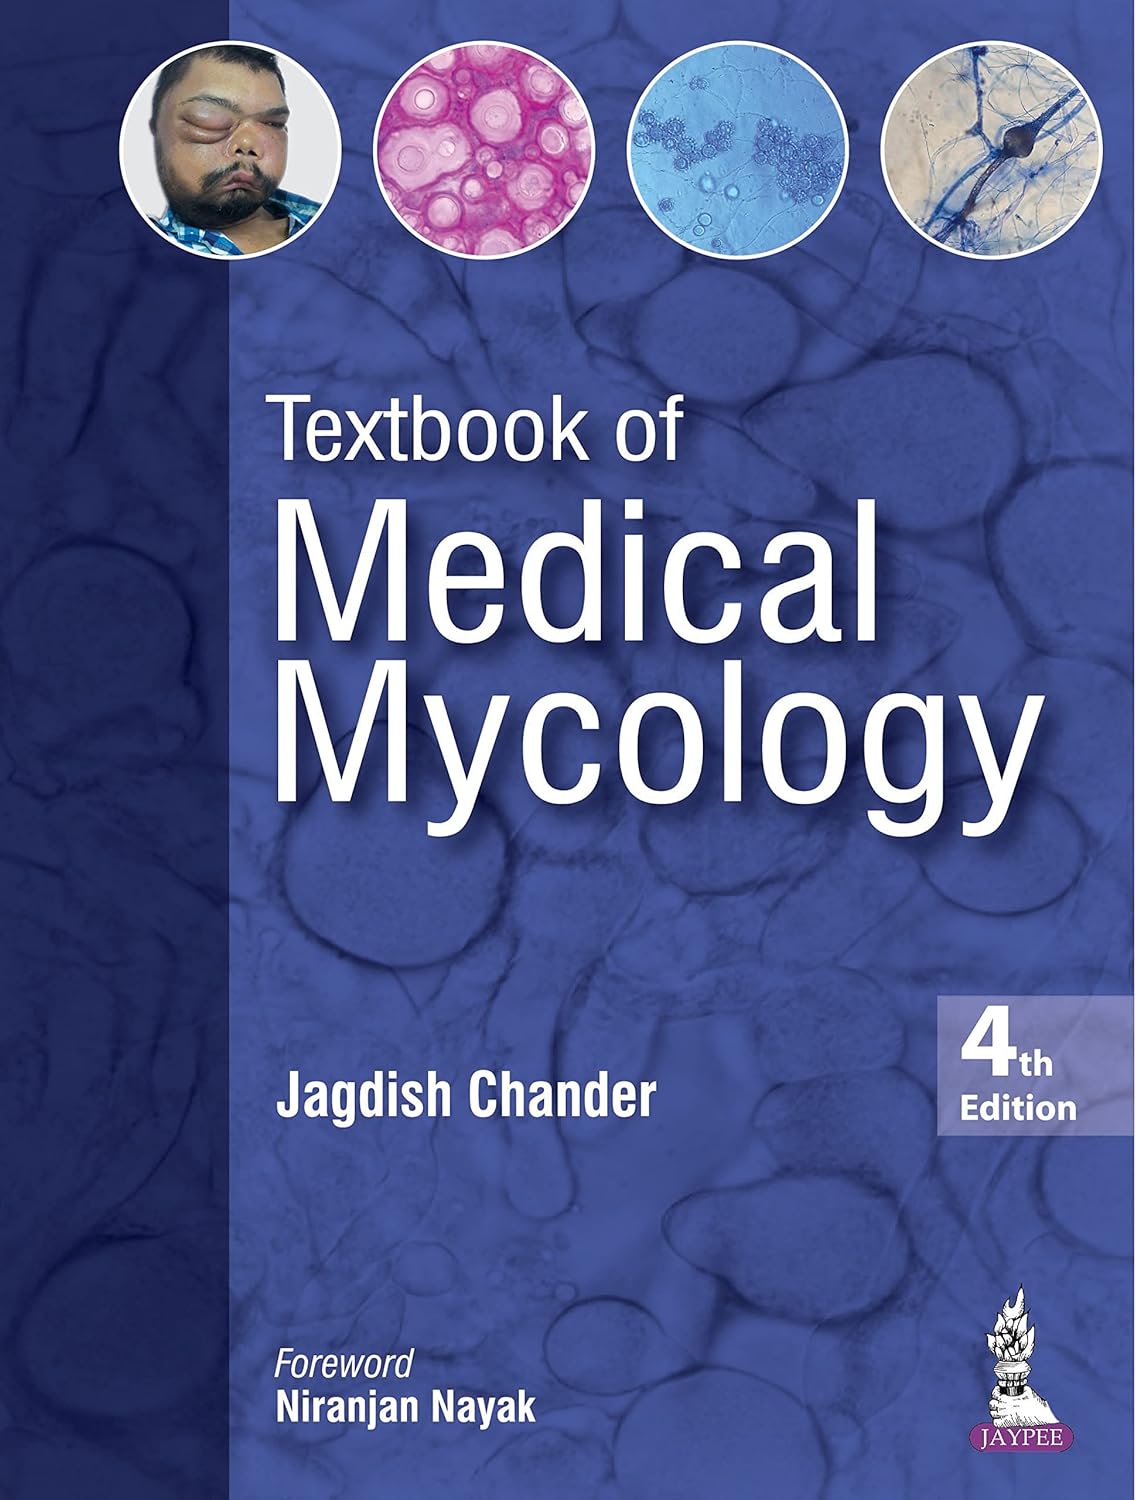 (EBook PDF)Textbook of Medical Mycology 4th Edition by M.D. Chander, Jagdish, Dr.